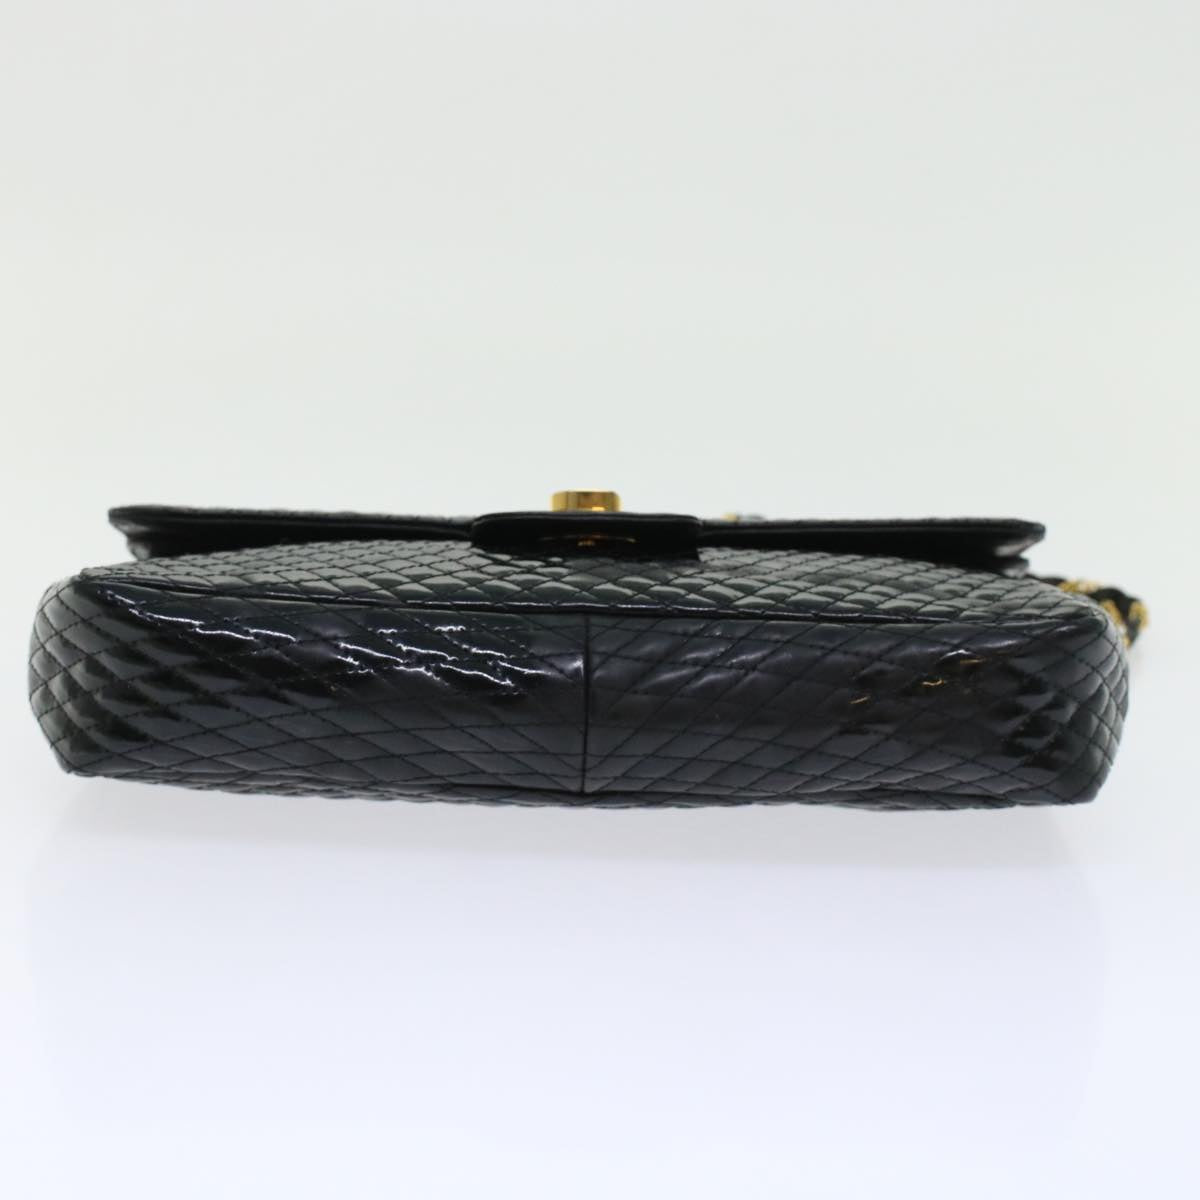 BALLY Chain Shoulder Bag Patent leather Black Auth yb189